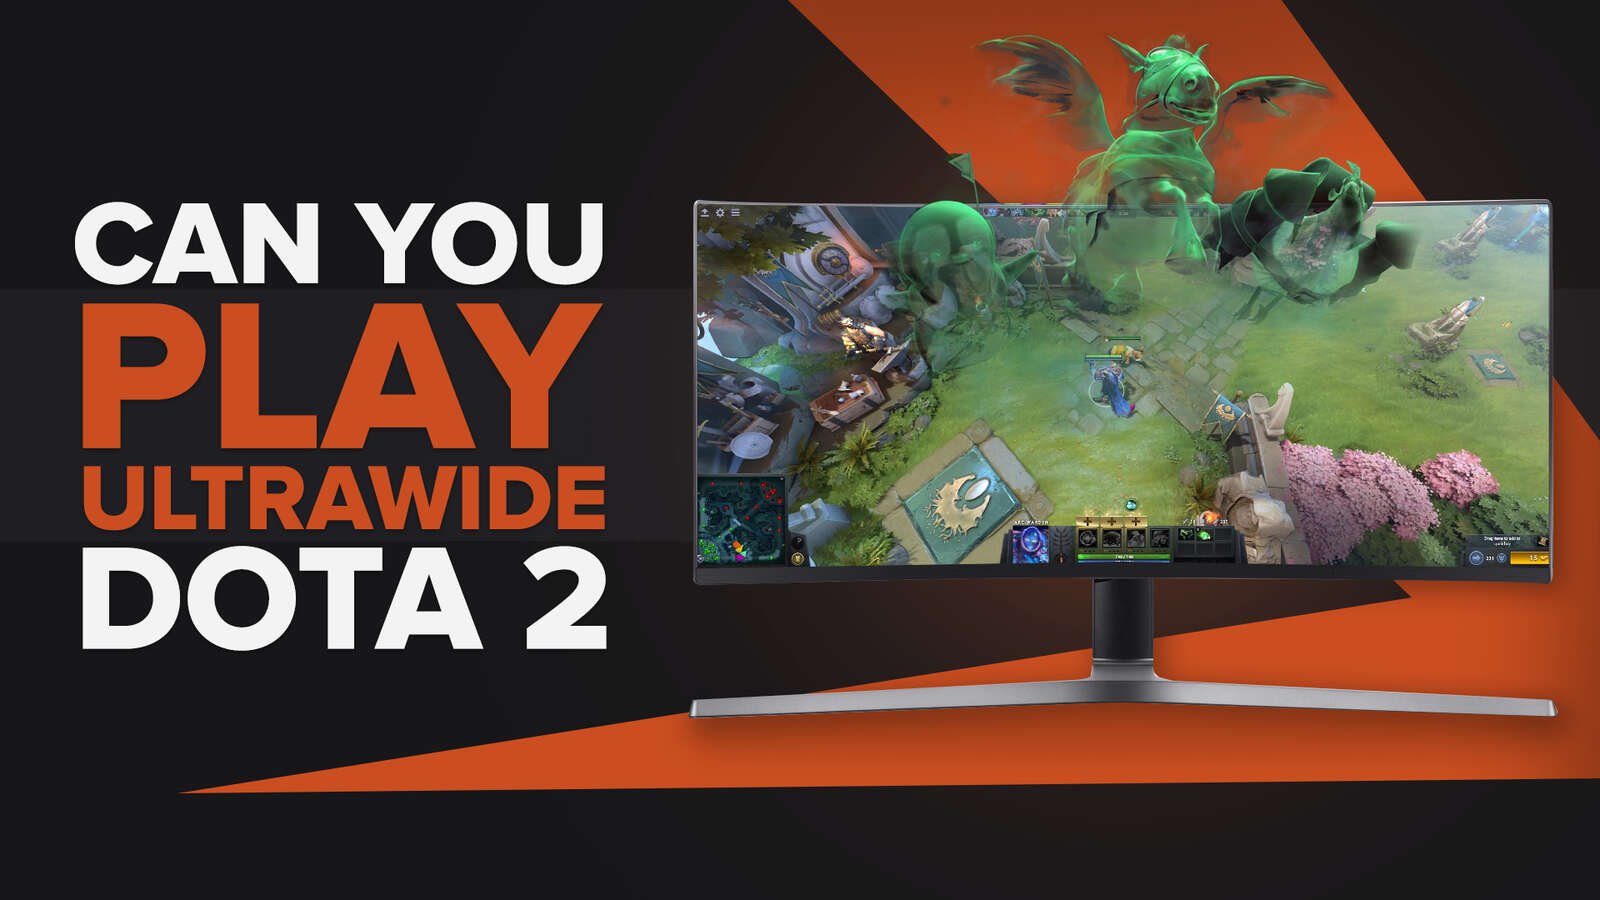 Can You Play Dota 2 on an Ultrawide Display [Explained]